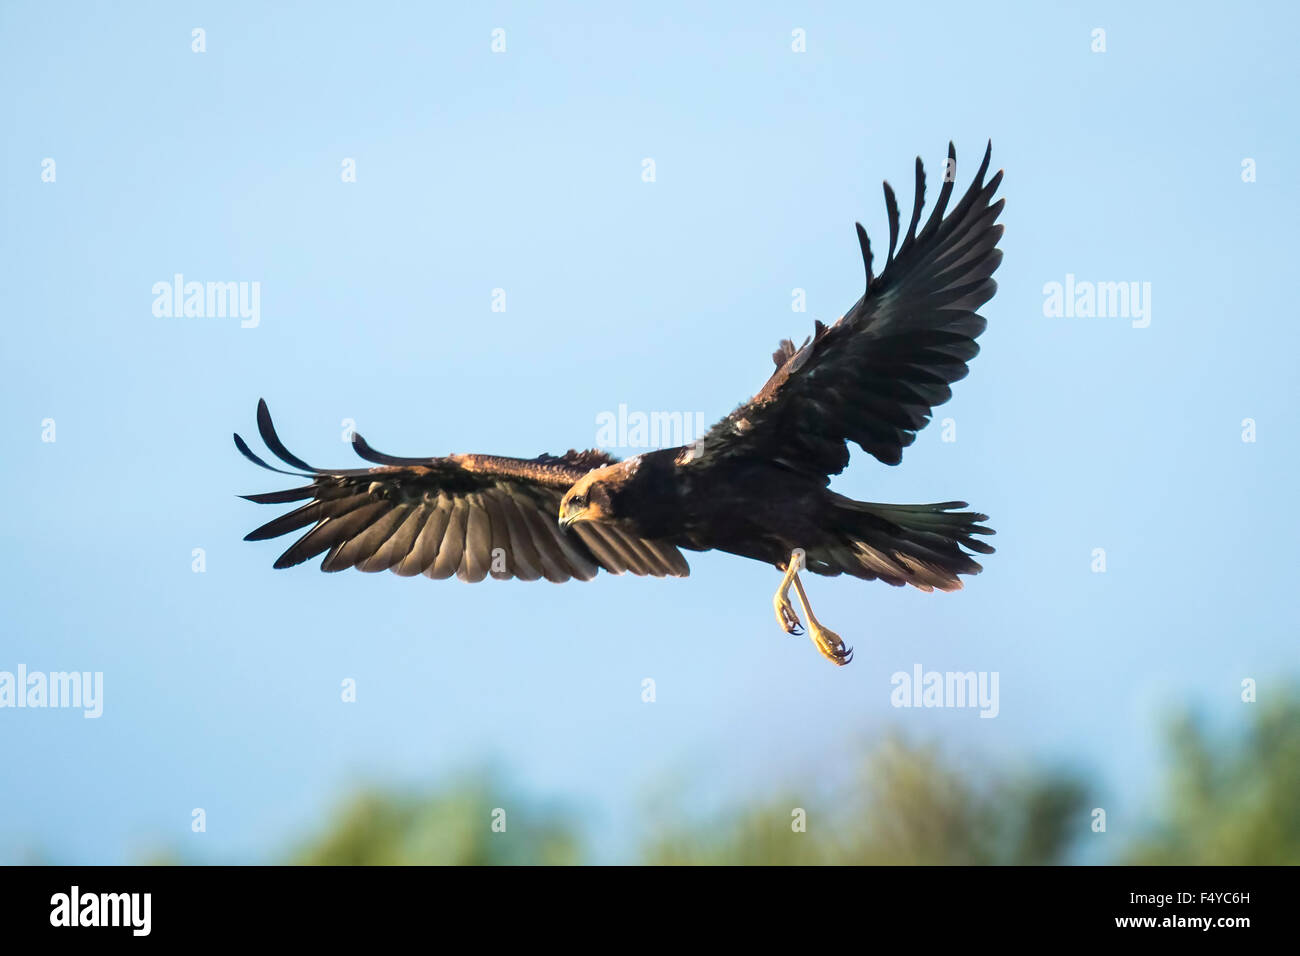 Western marsh harrier, Circus aeruginosus, searching and hunts for a prey above a field Stock Photo